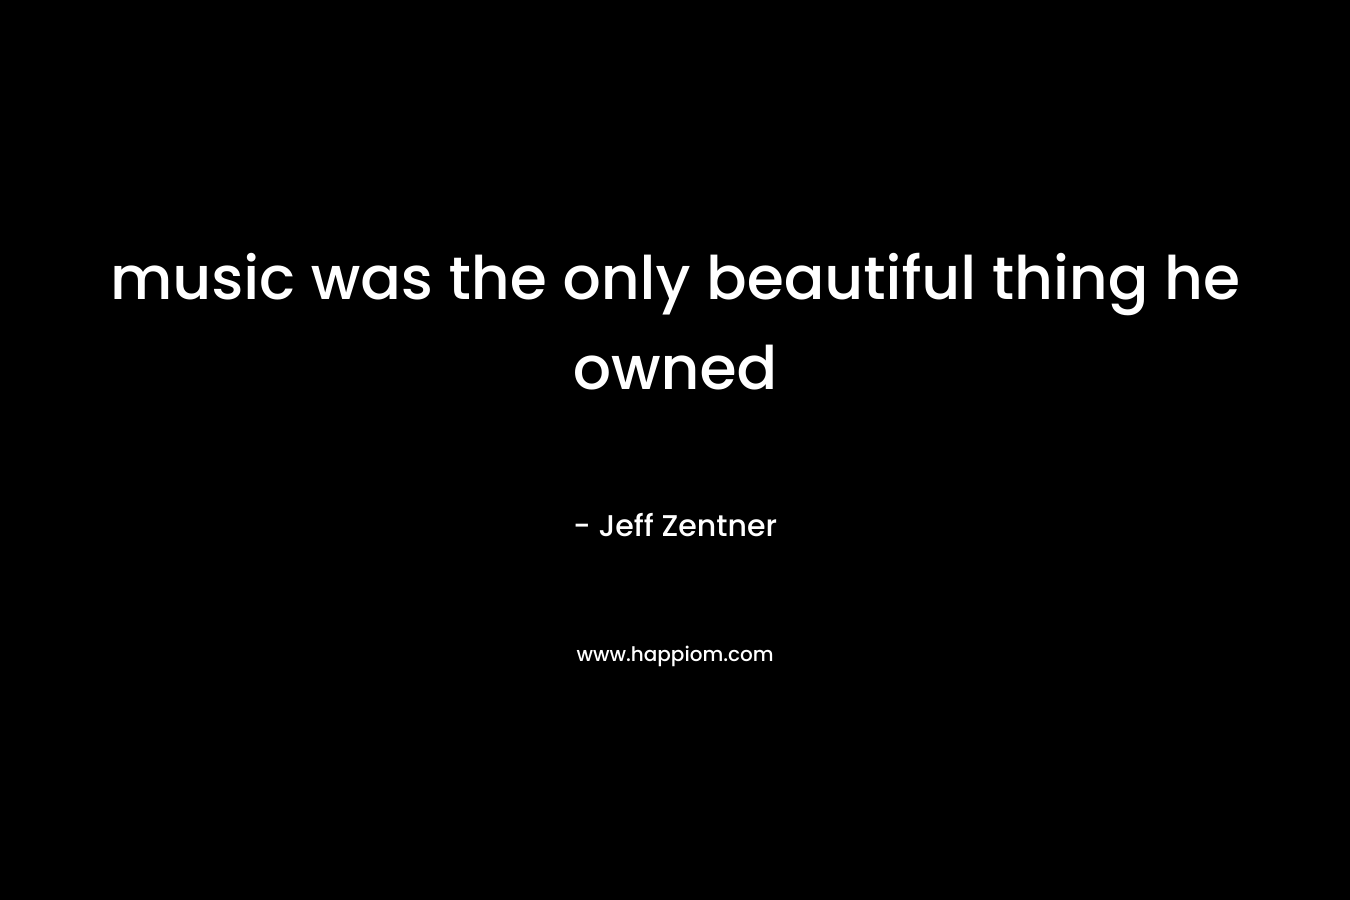 music was the only beautiful thing he owned